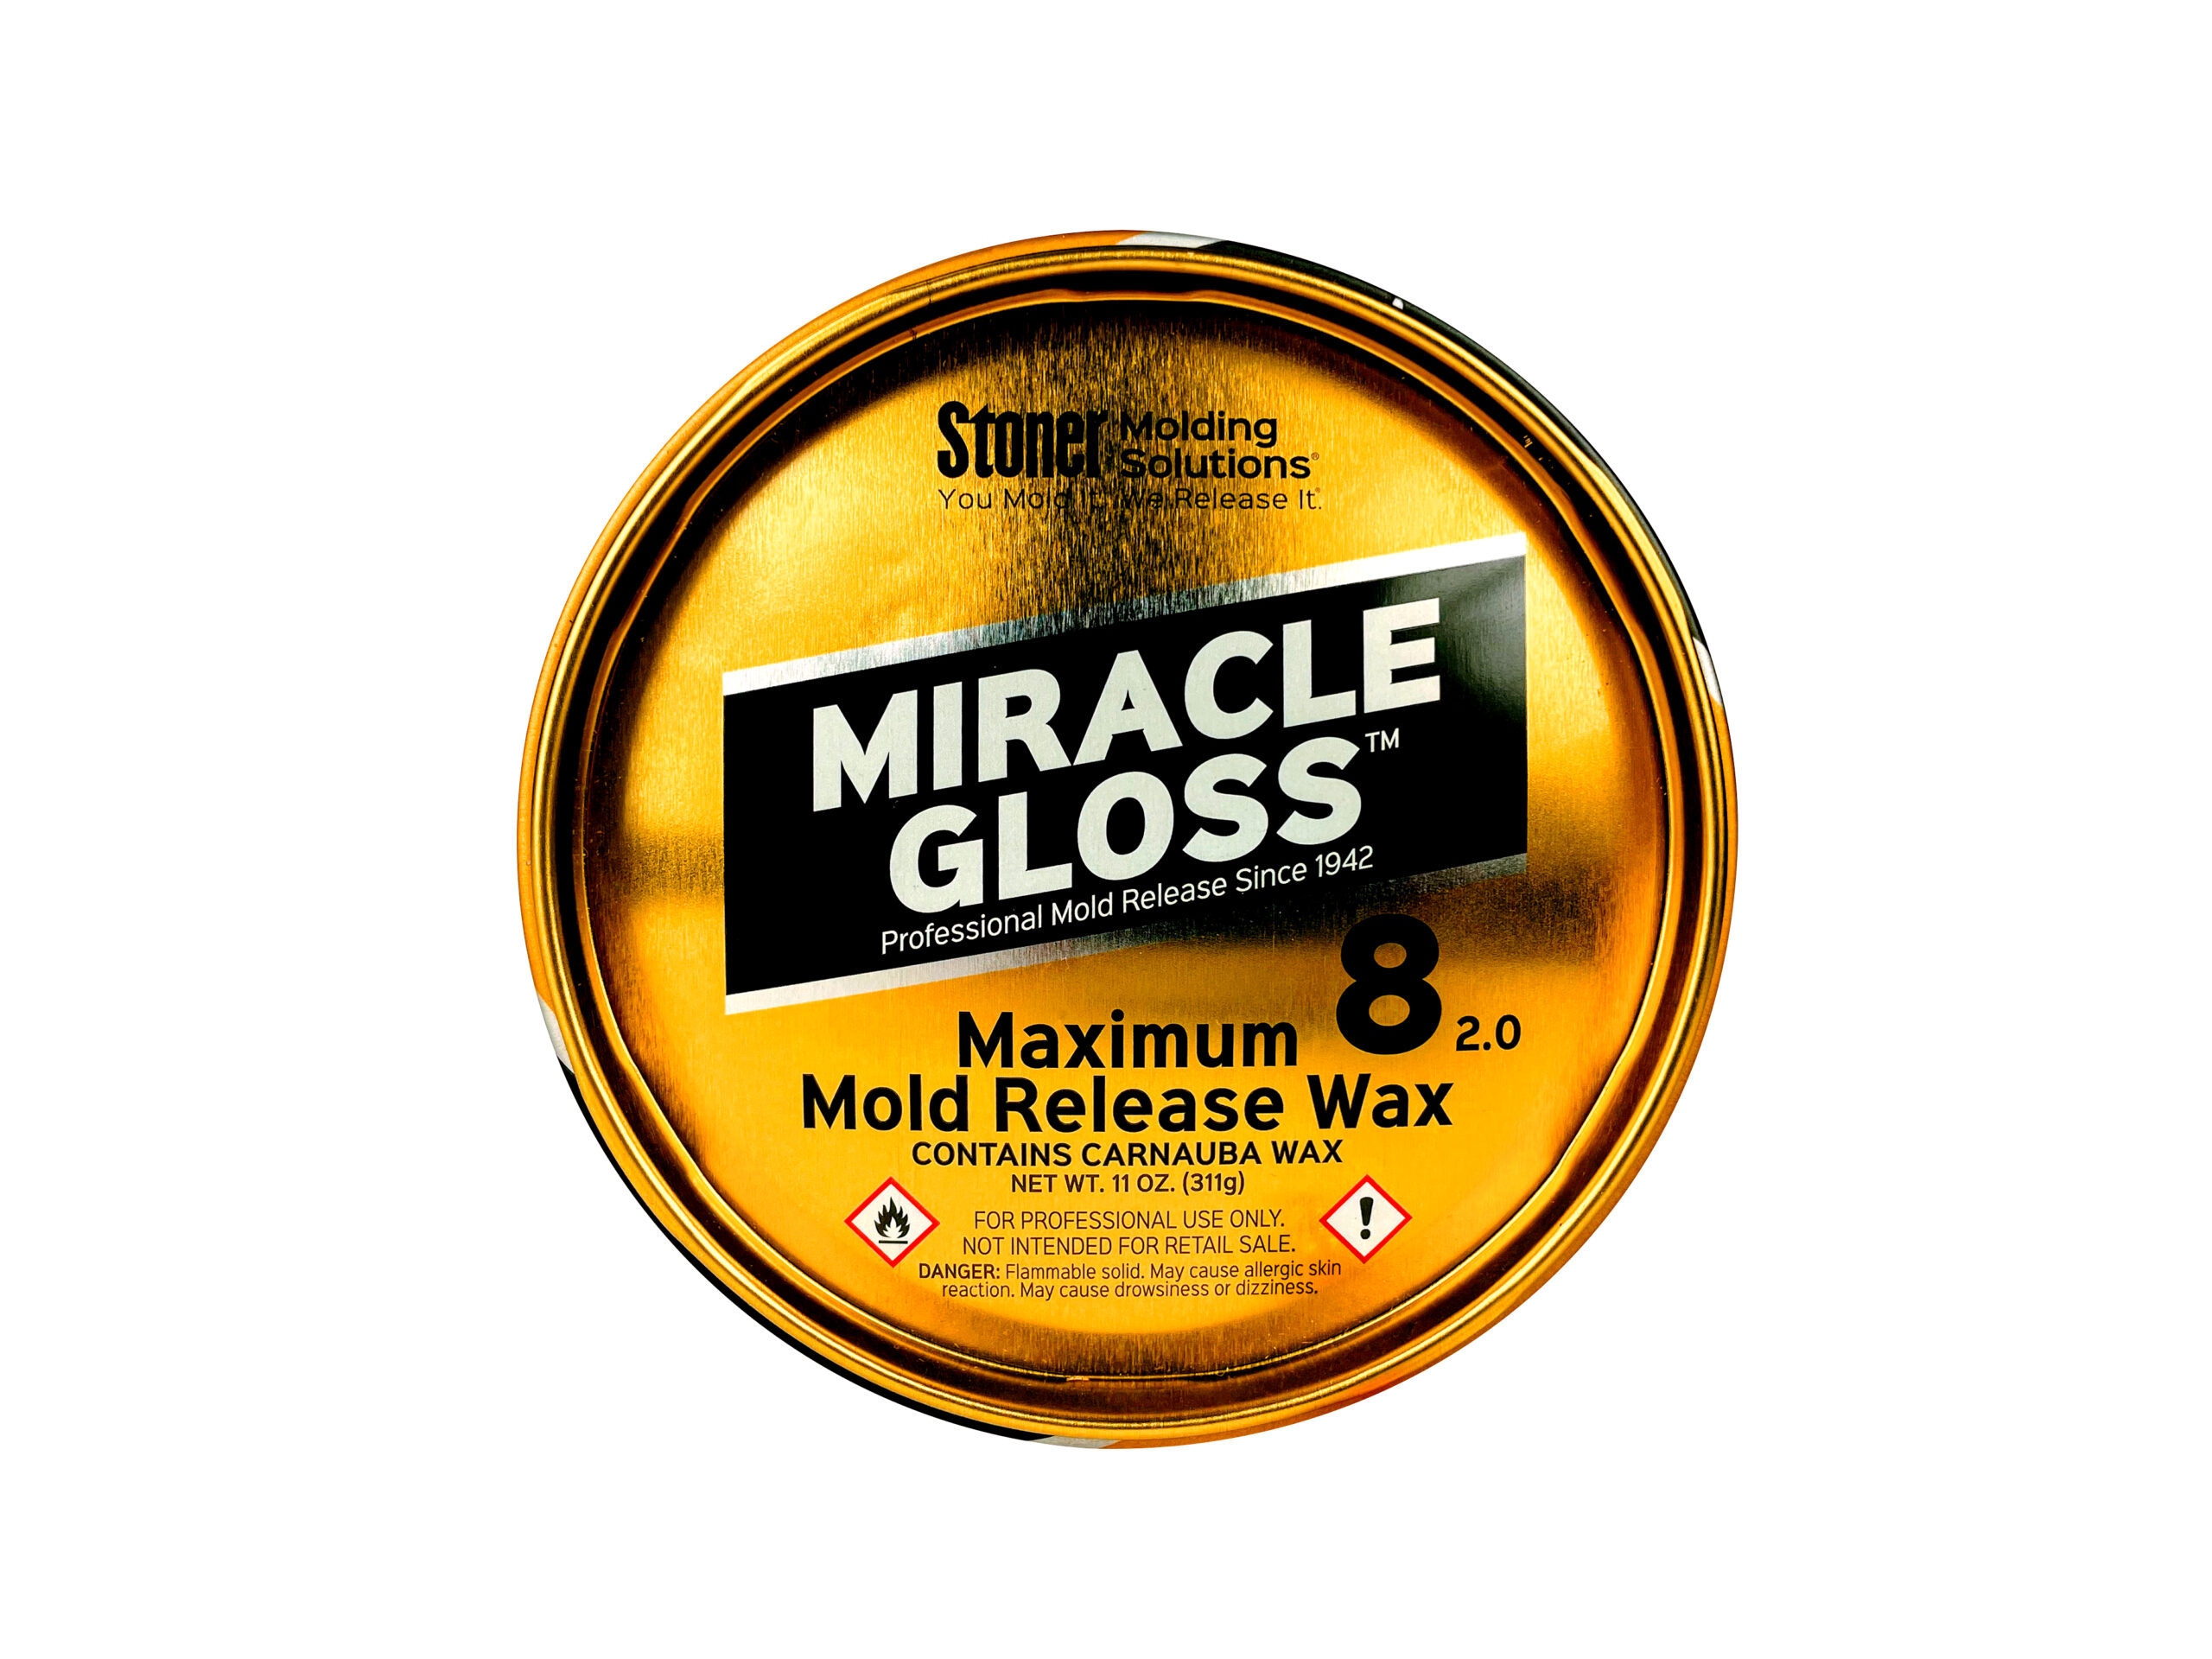 Mold Release, Molding Solutions